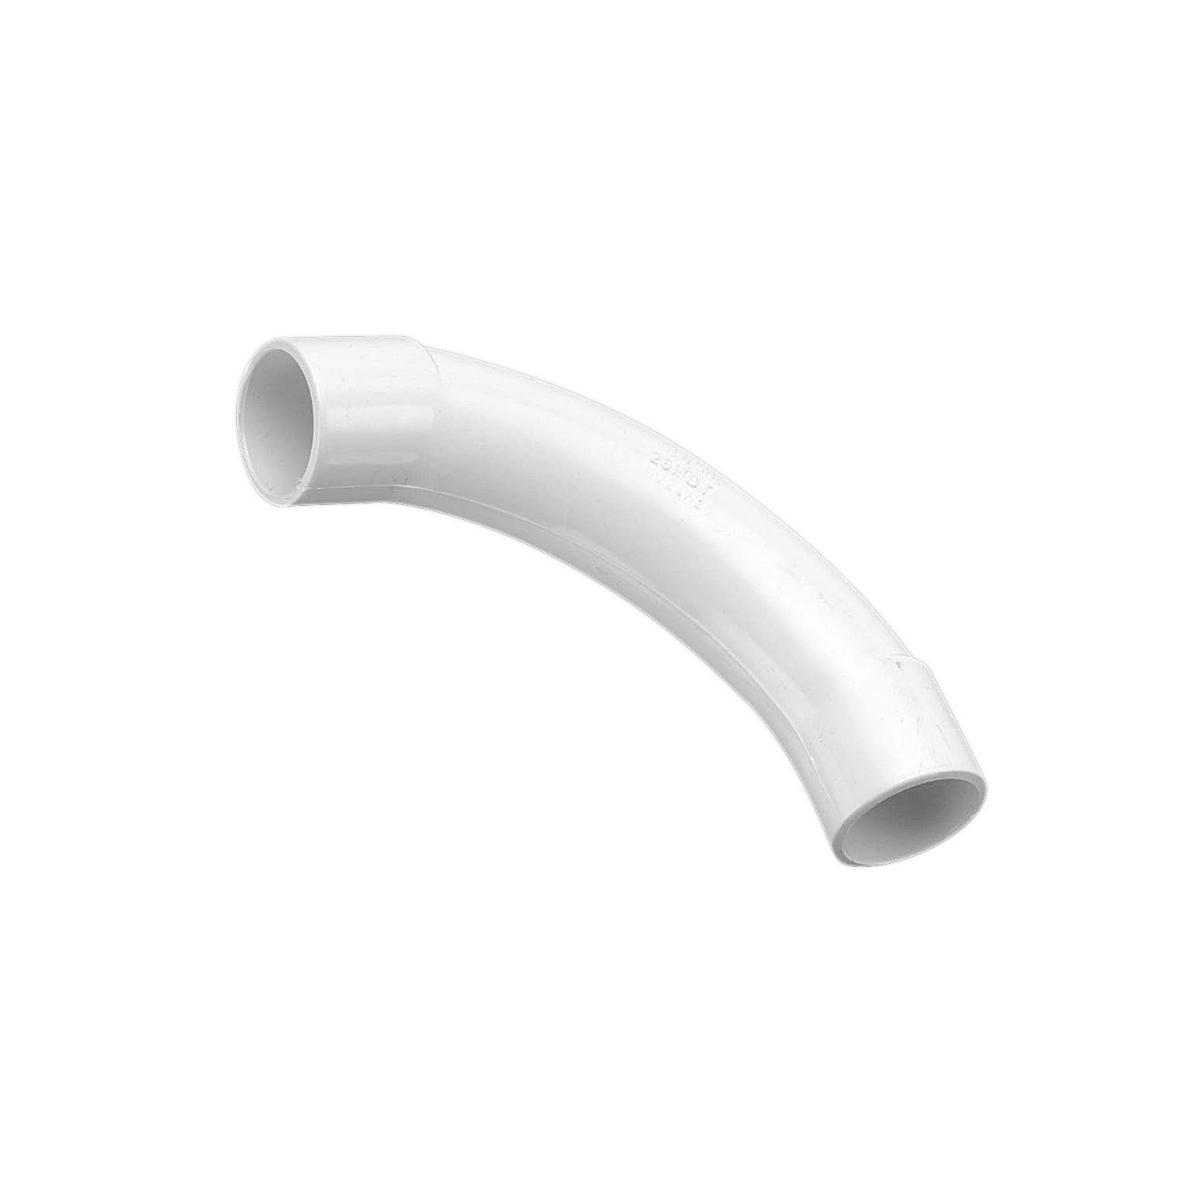 COMMS SOLID BEND PVC 32MM WHITE